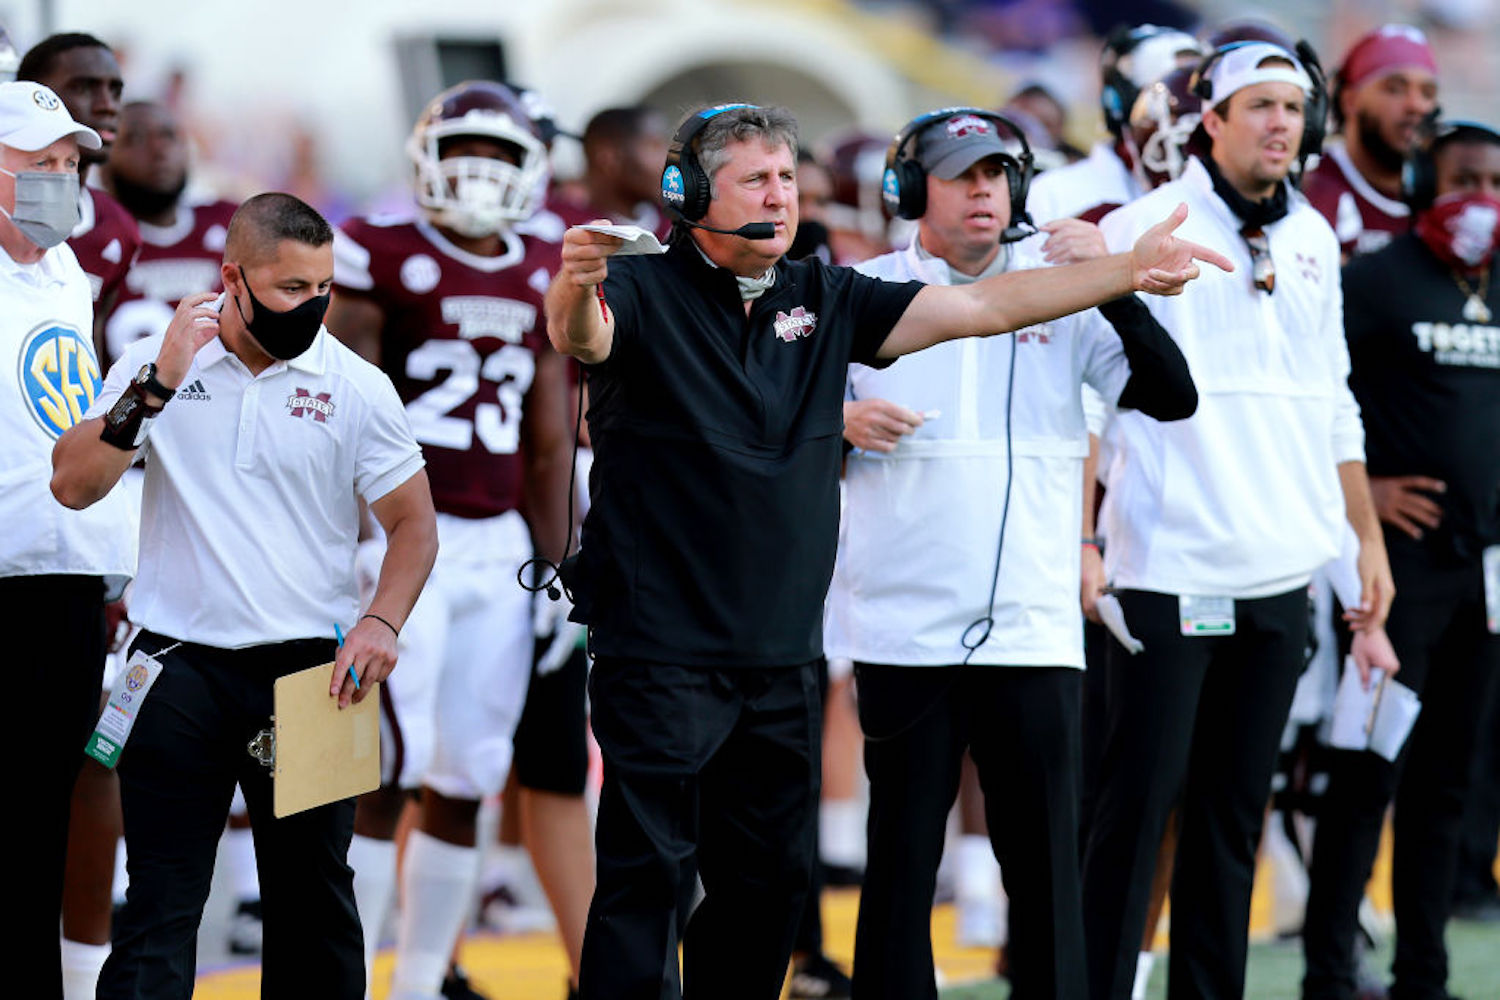 Mike Leach called for a 'purge' of the program a few weeks ago, and Mississippi State is now losing players left and right.